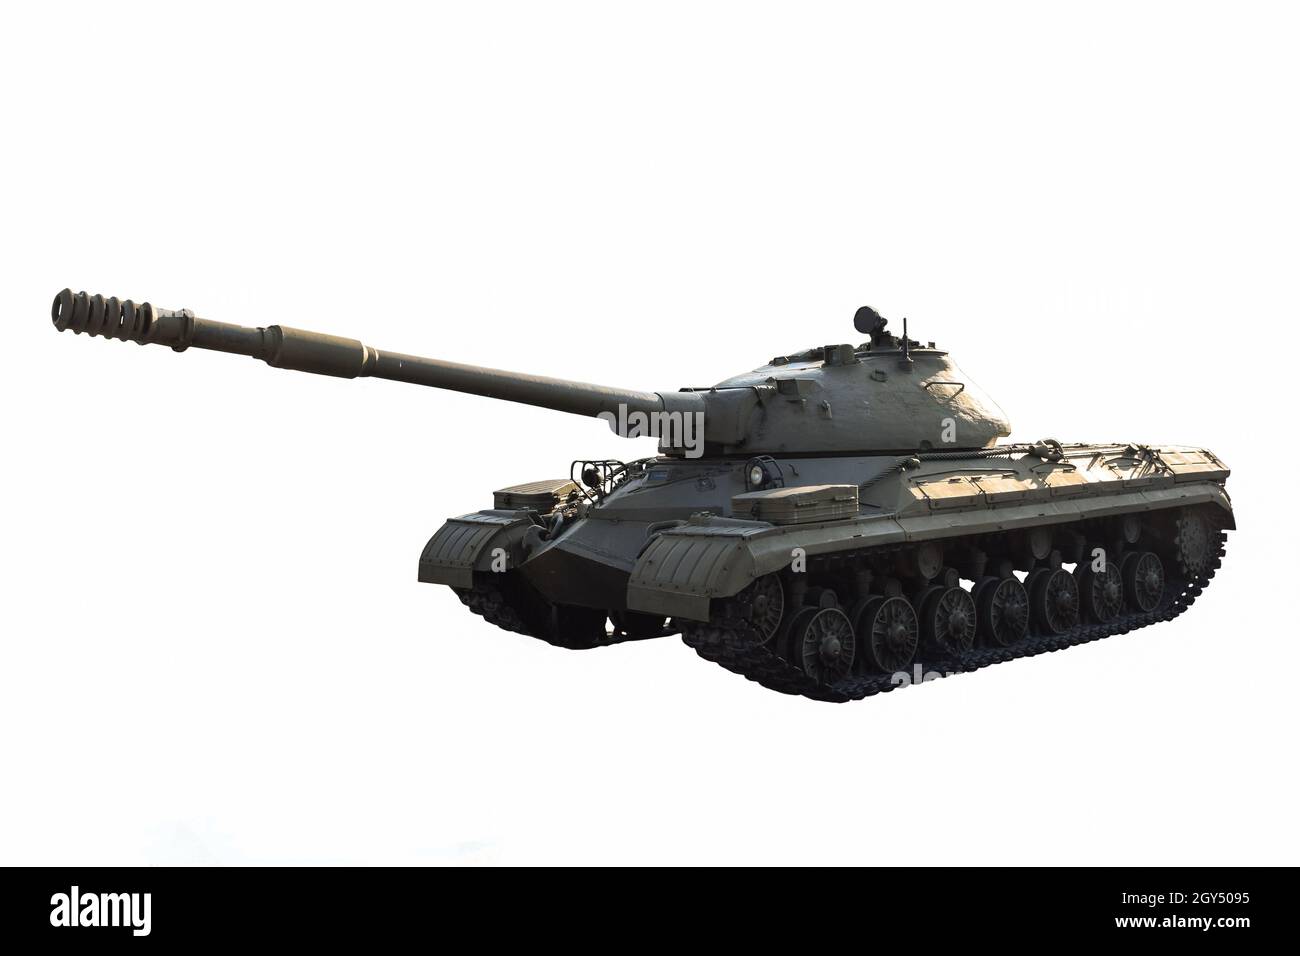 Soviet heavy tank without identification marks. Photographed from the front at an angle on a white background with clipping path. Stock Photo